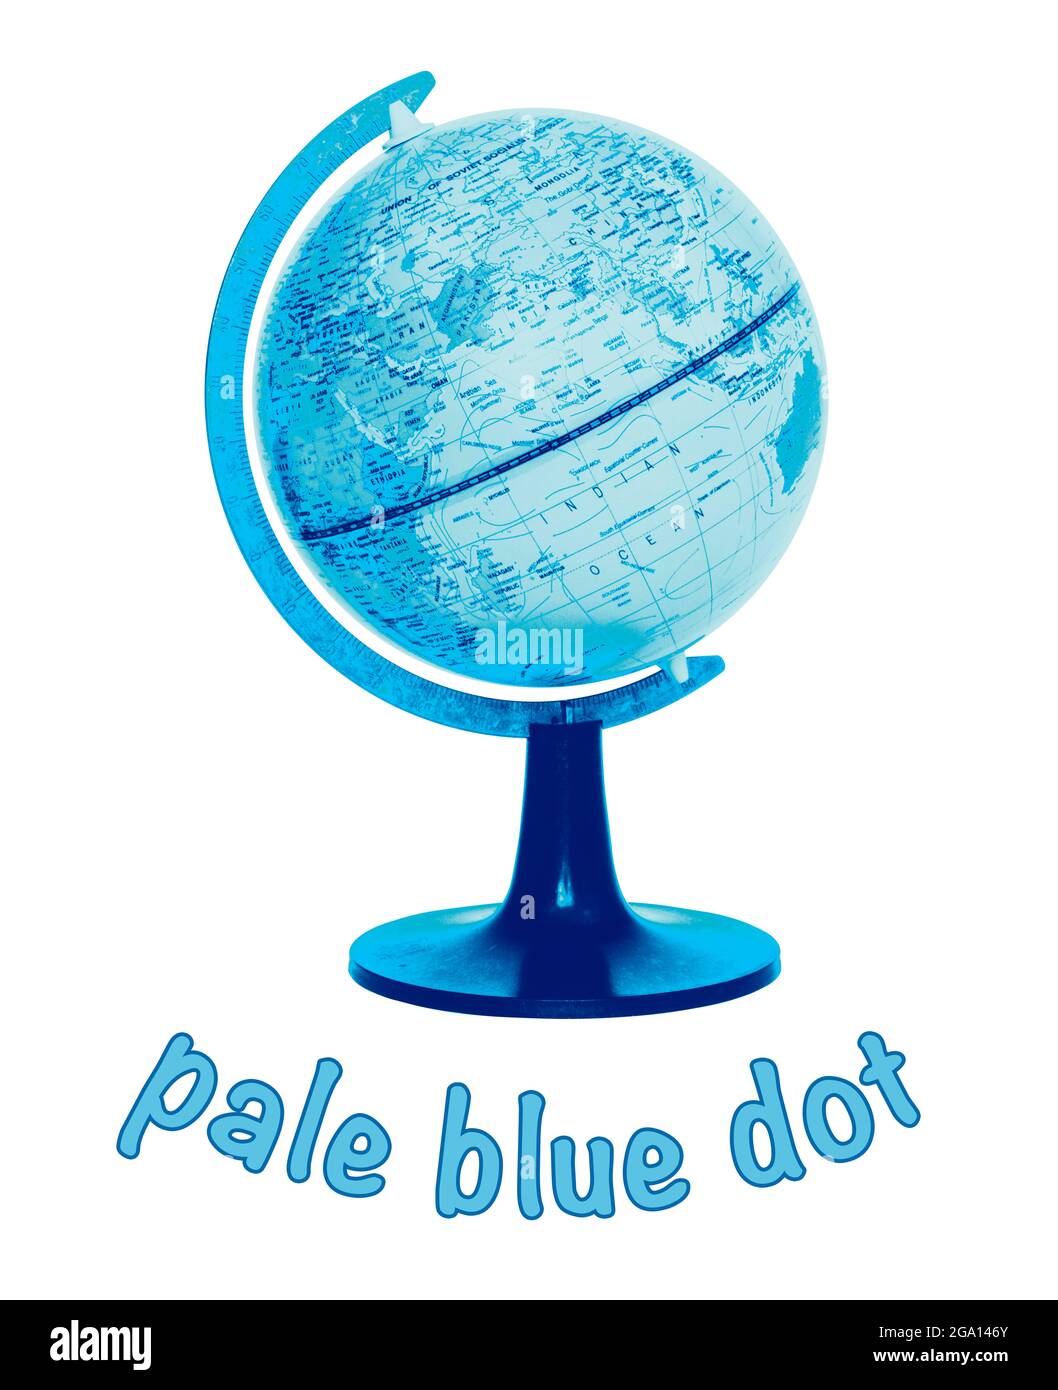 Concept image of a small globe of the world and the caption 'Pale Blue Dot' on a white background Stock Photo